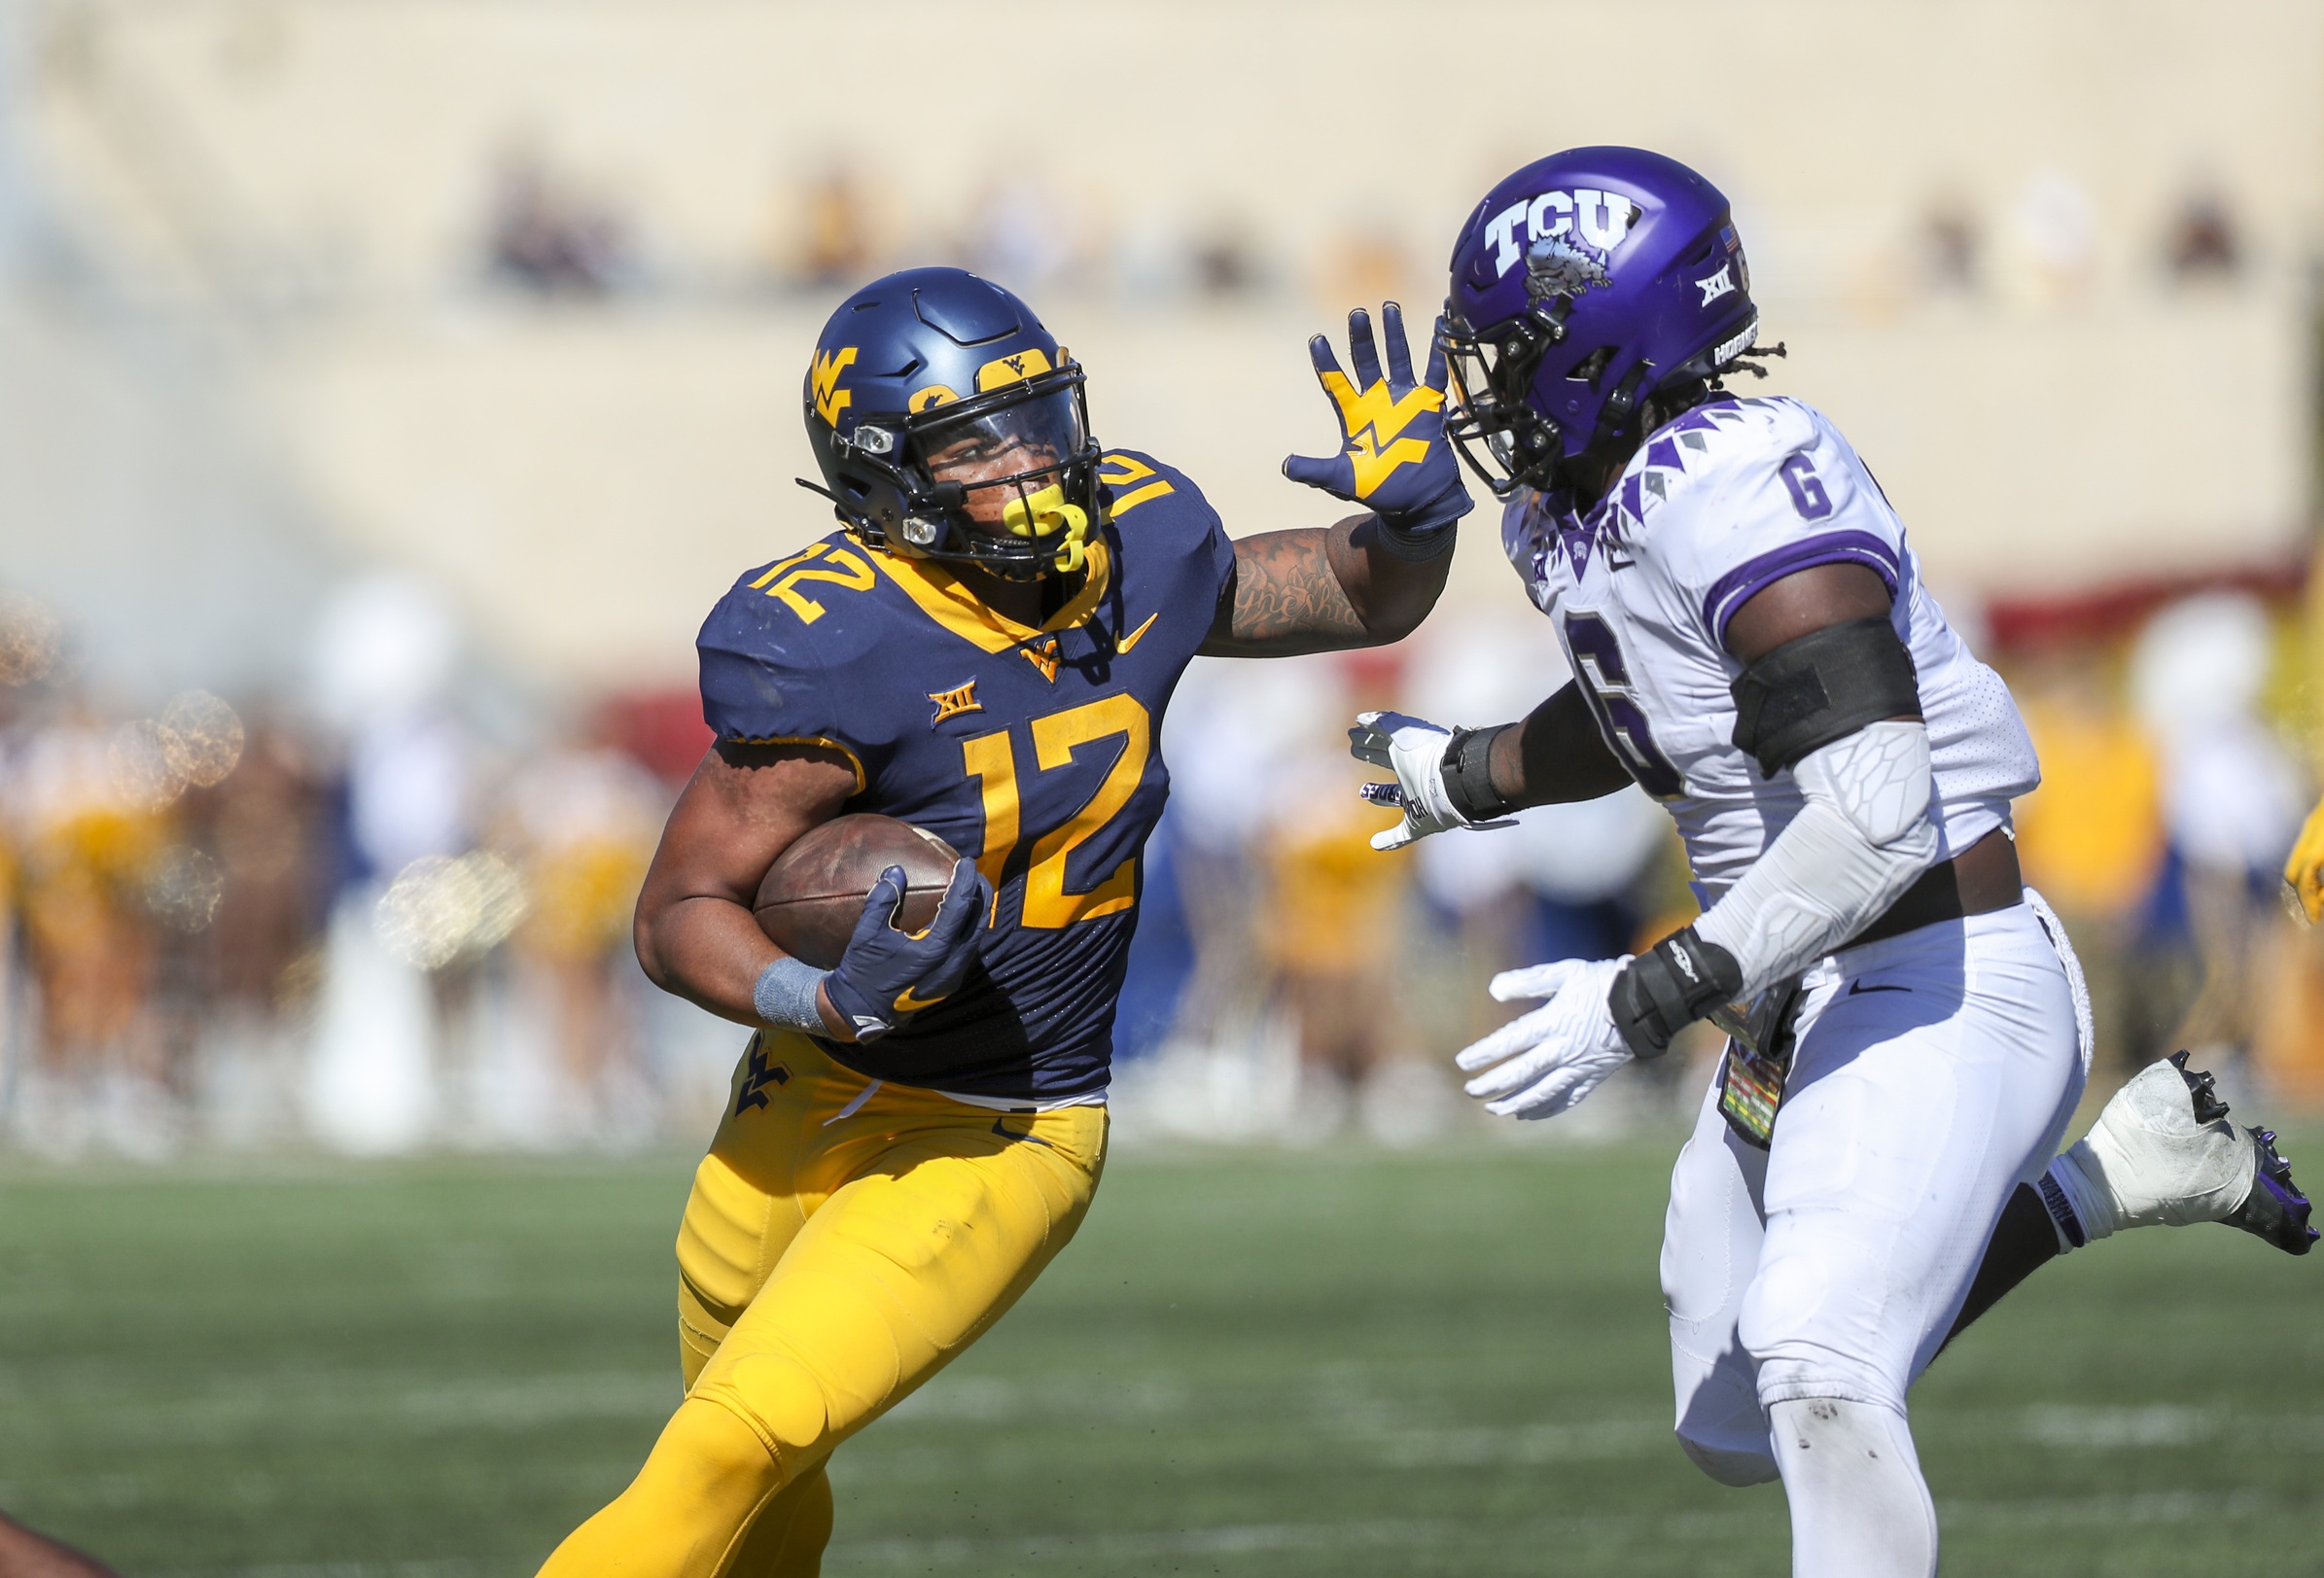 We continue our preseason coverage of the Mountaineers' football team by offering our West Virginia 2023 running backs preview.